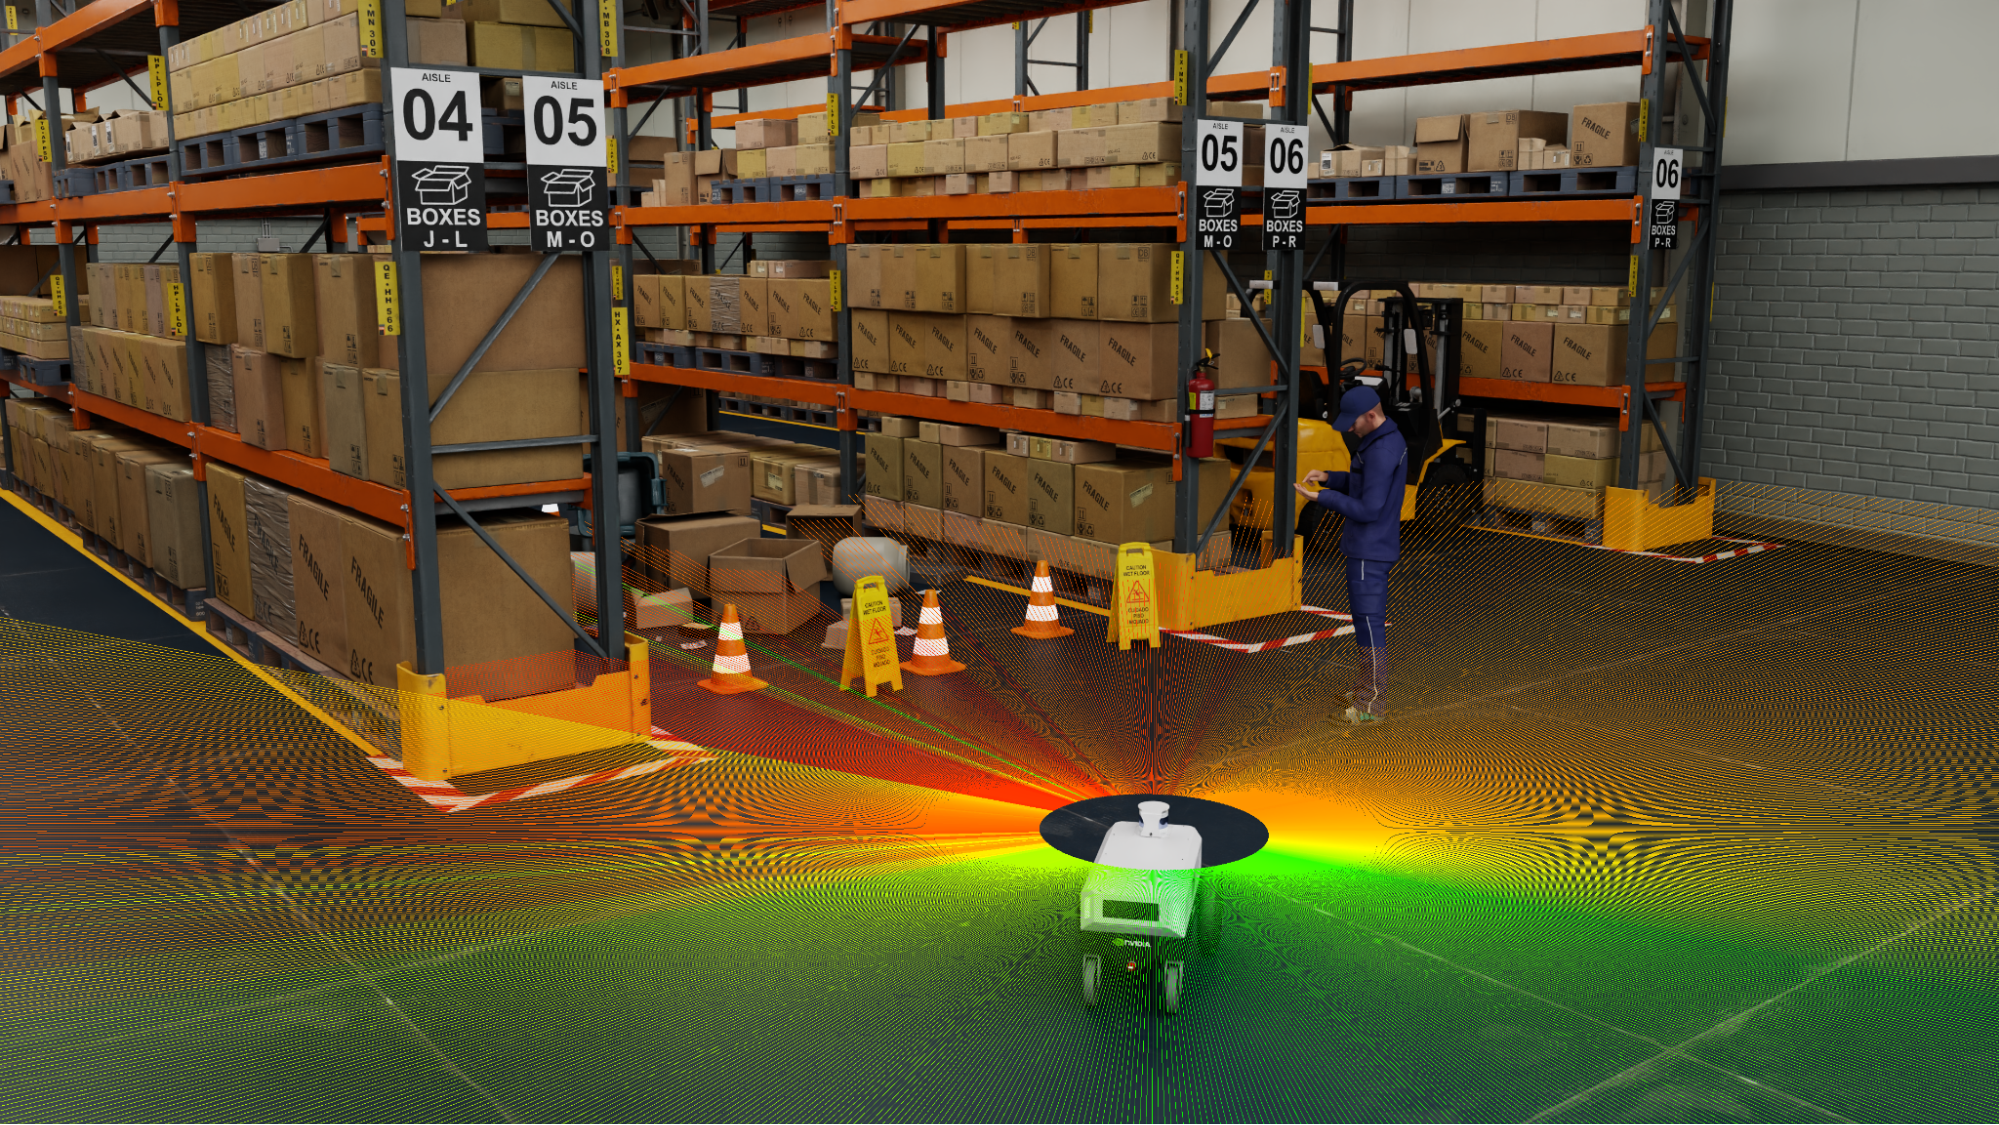 Image of warehouse scene with AMR robot.